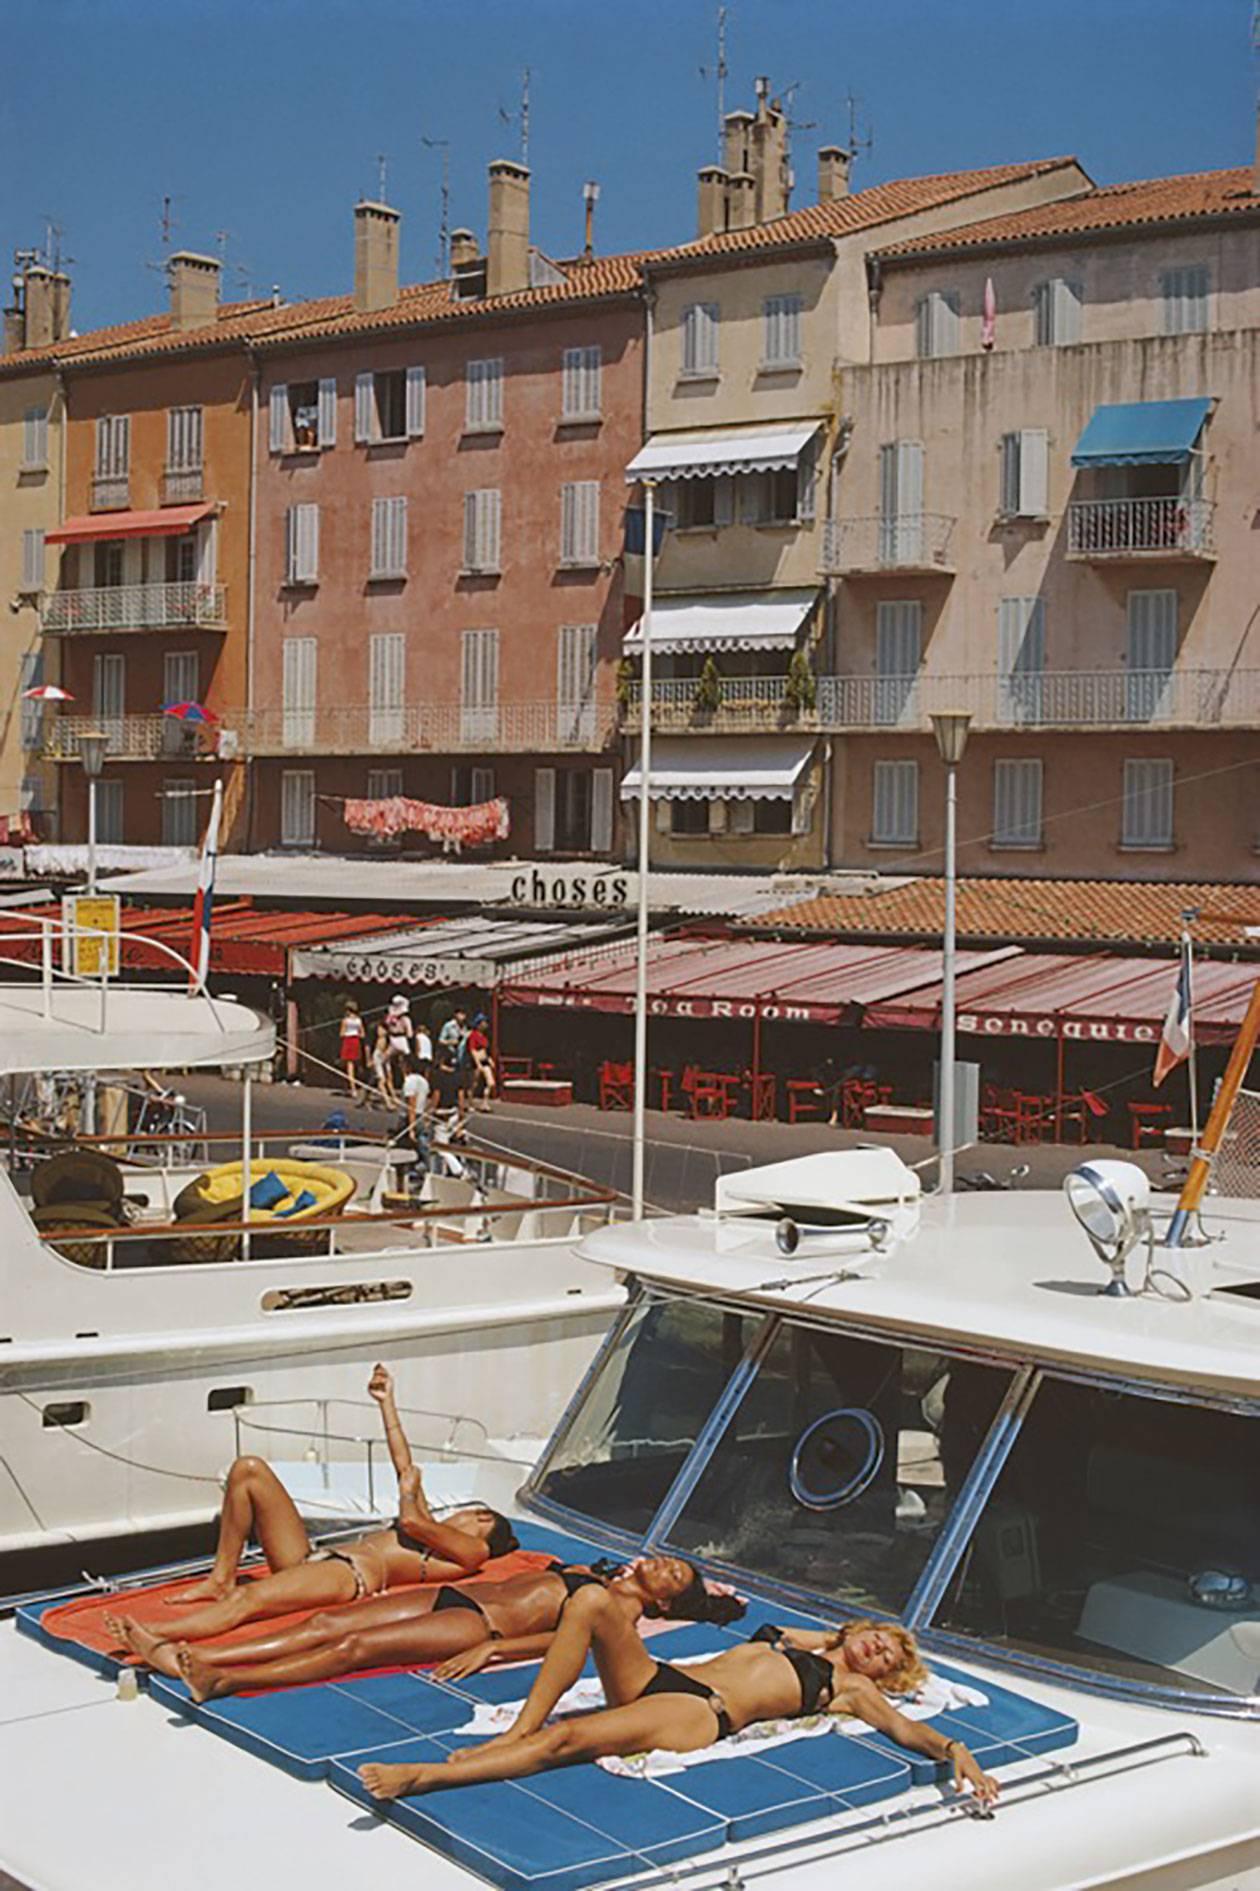 Saint-Tropez Sunbathers, 1971 
Chromogenic Lambda print
Estate stamped and hand numbered edition of 150 with certificate of authenticity from the estate.

Holidaymakers lounging on the deck of their luxury yacht in Saint-Tropez, France, August